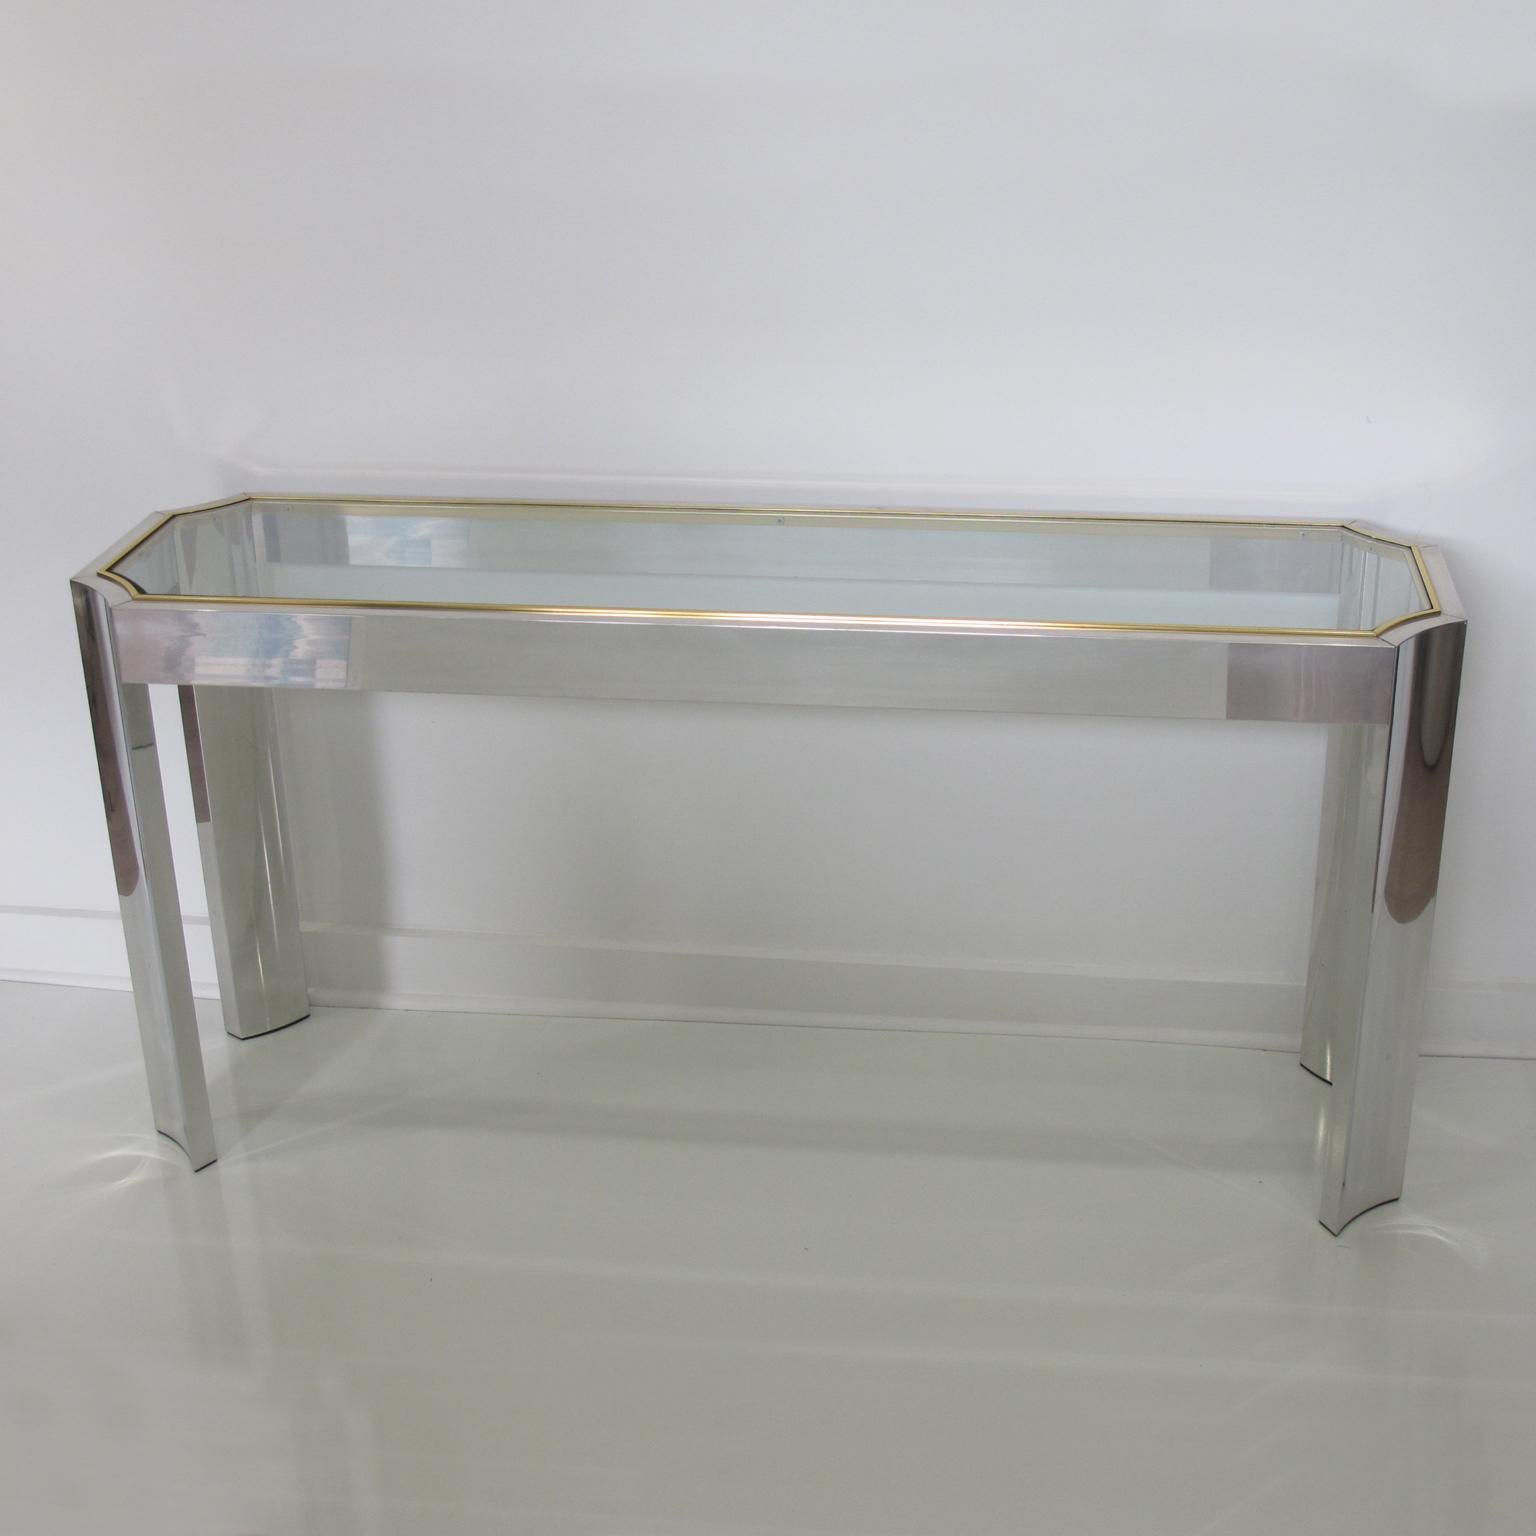 This superb modernist console or sofa table in aluminum and brass is reminiscent of the work of Willy Rizzo in the 1970s. Beautiful and functional, this sofa table is an obvious choice. The piece features an elongated, sleek shape with an octagonal